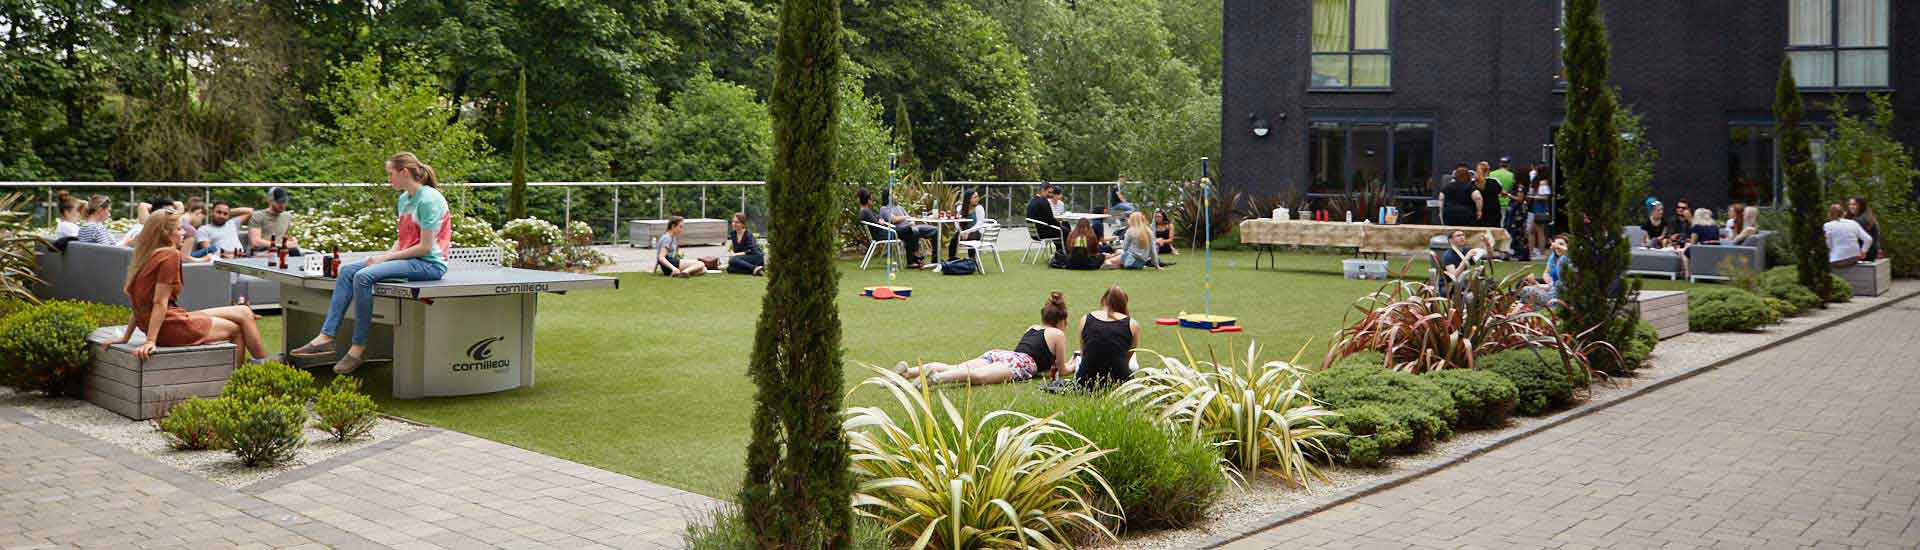 Outdoor area at CODE with students sat on the grass enjoying the sunshine